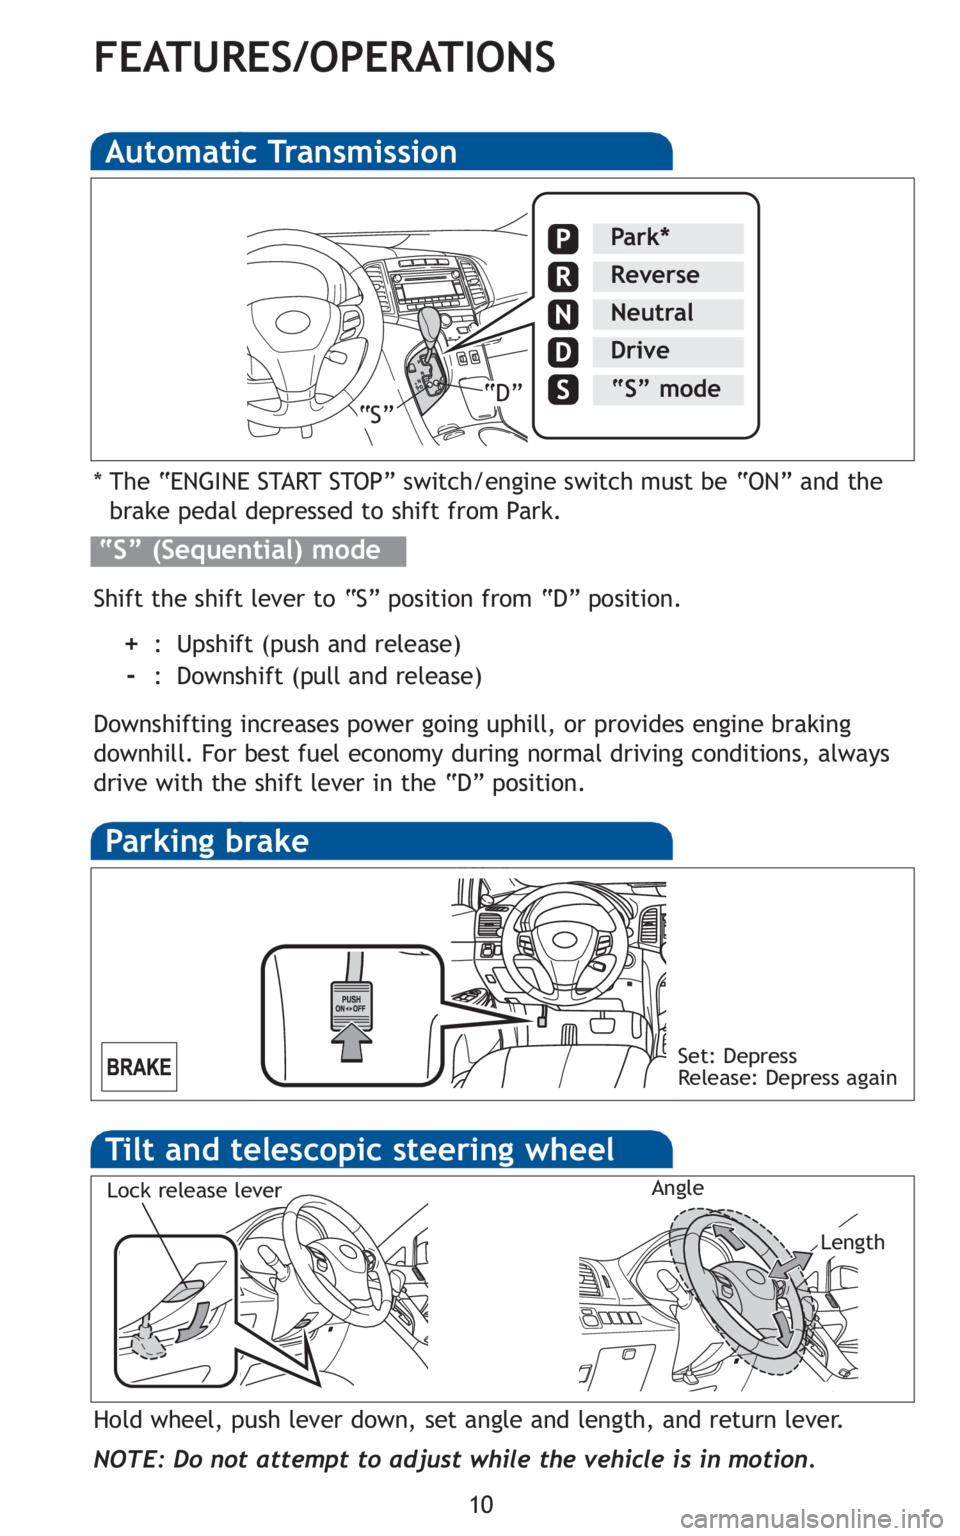 TOYOTA VENZA 2010  Owners Manual (in English) 10
FEATURES/OPERATIONS
Automatic Transmission
* The “ENGINE START STOP” switch/engine switch must be “ON” and the
brake pedal depressed to shift from Park.
Shift the shift lever to “S” pos